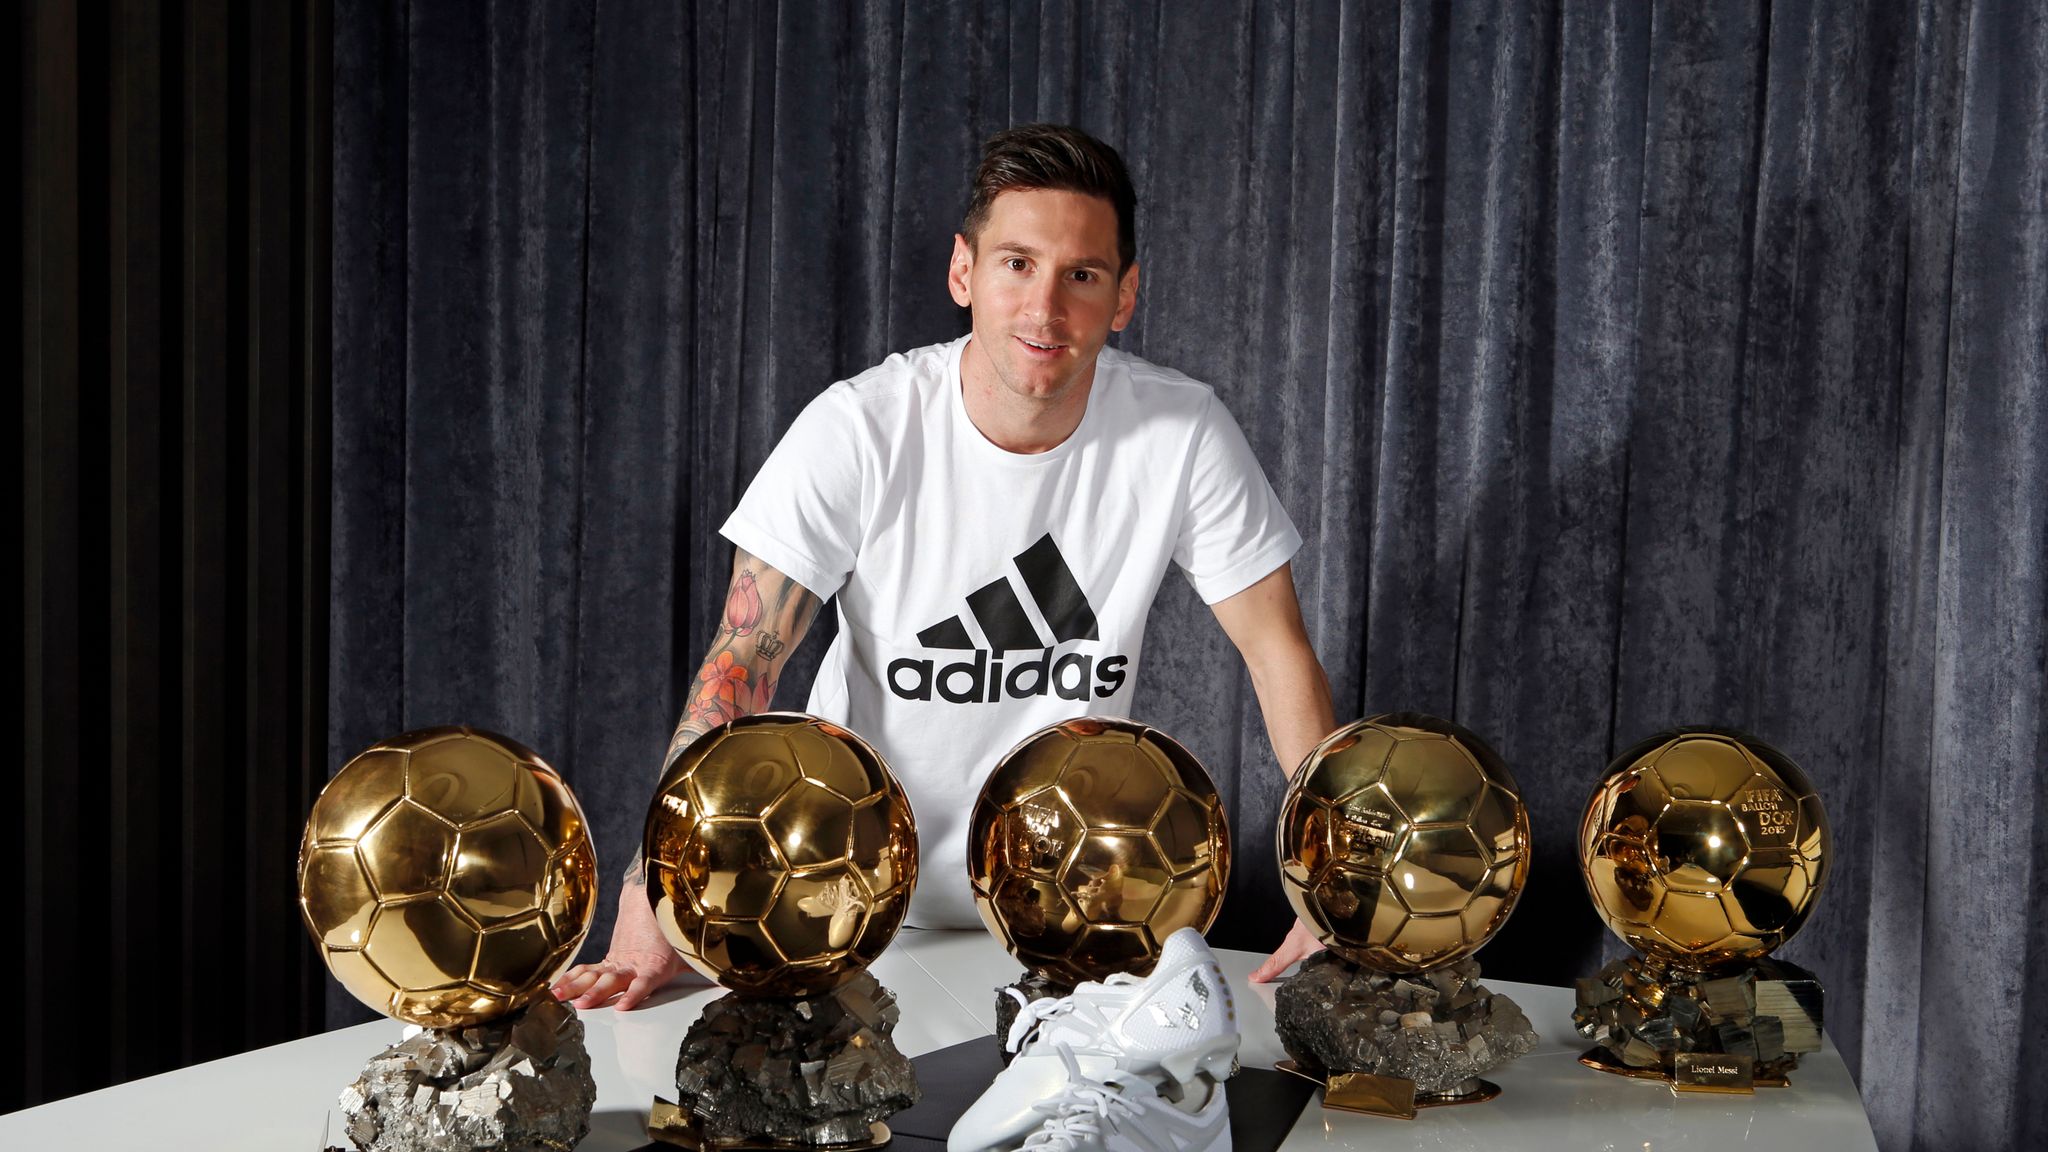 tekort beneden storting Five-time Ballon d'Or winner Lionel Messi receives platinum boot from adidas  | Football News | Sky Sports